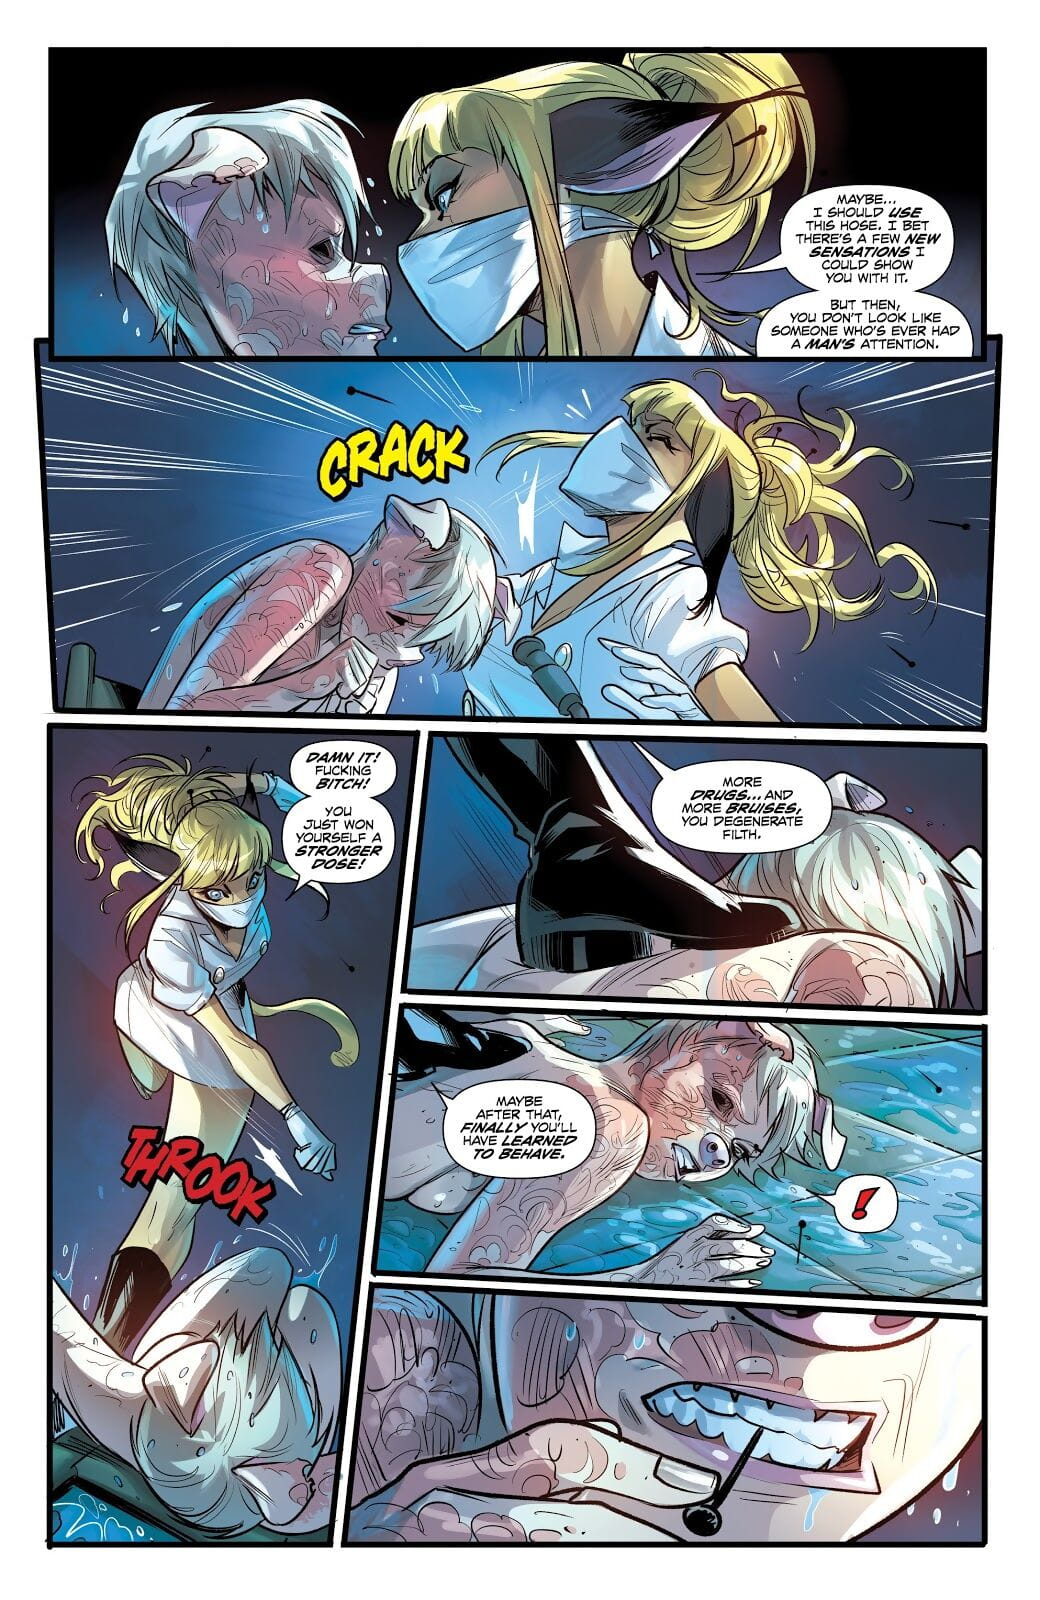 Unnatural - Issue 10 page 1